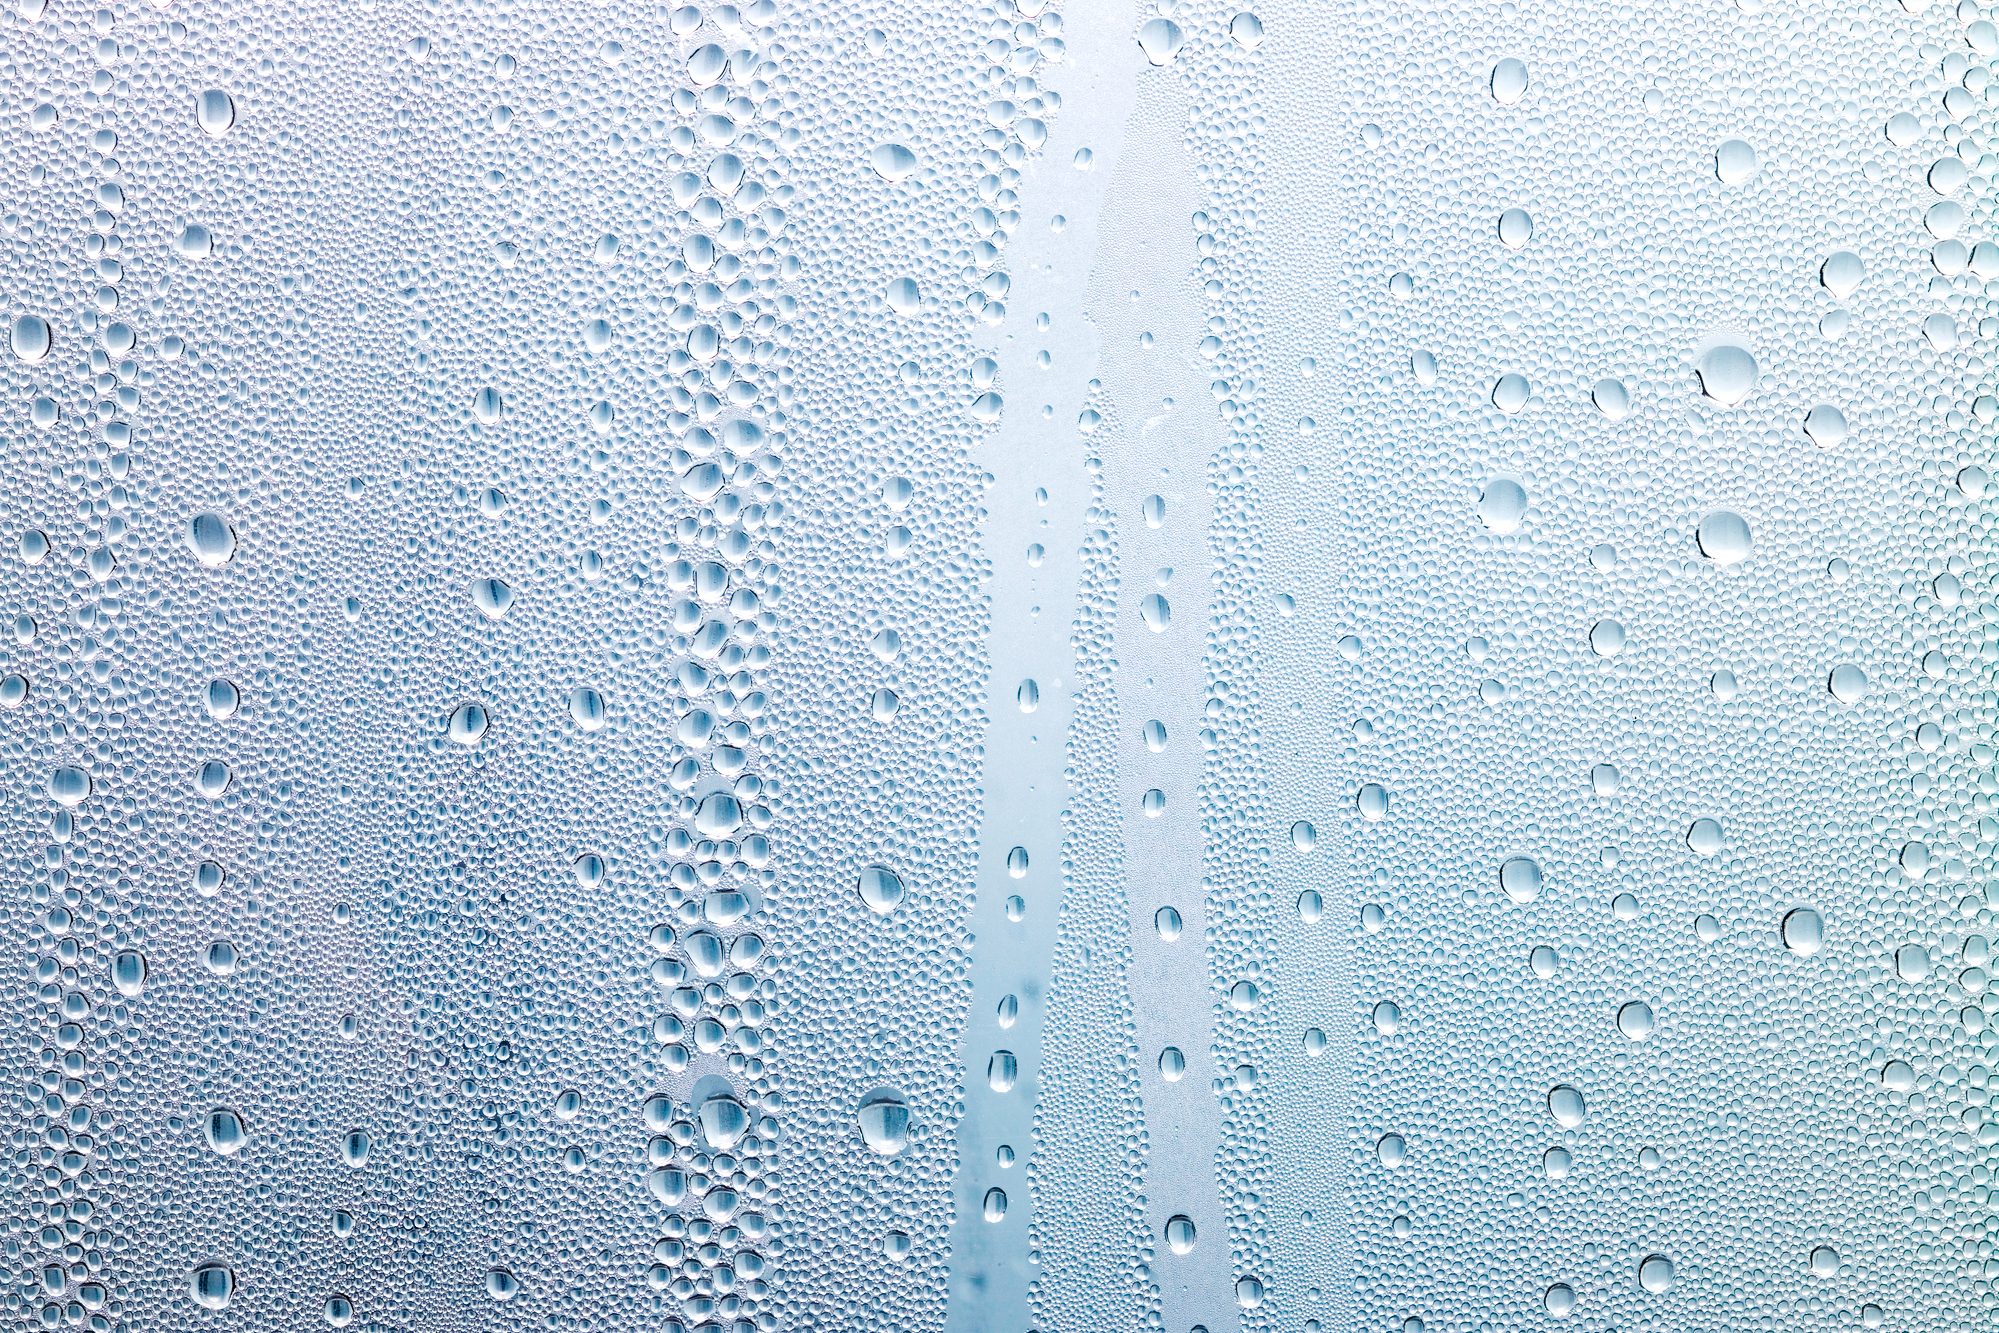 Steam Showers: What You Need To Know